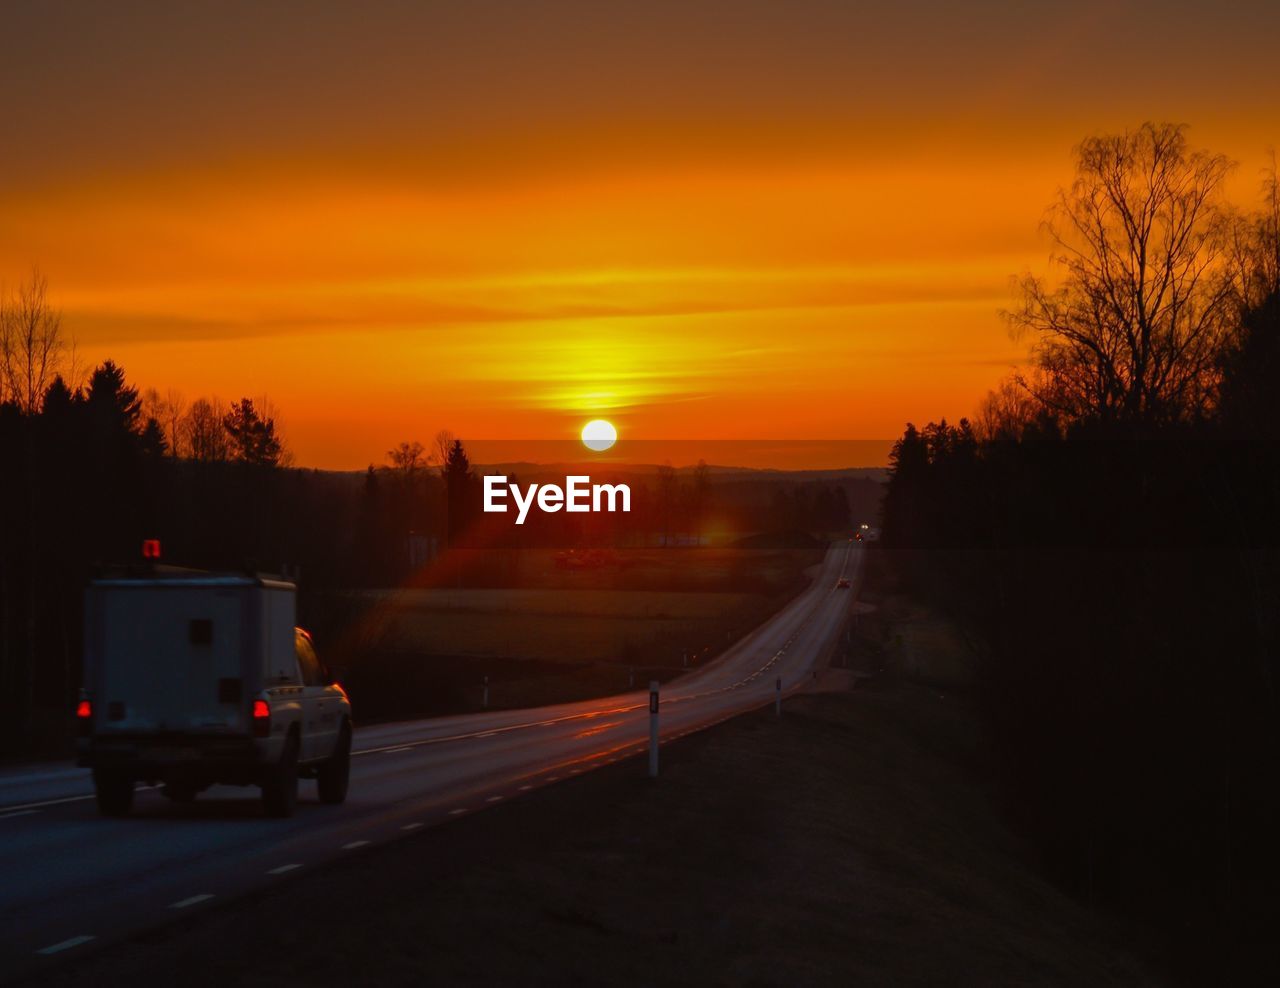 Pick-up truck on country road against orange sky during sunset